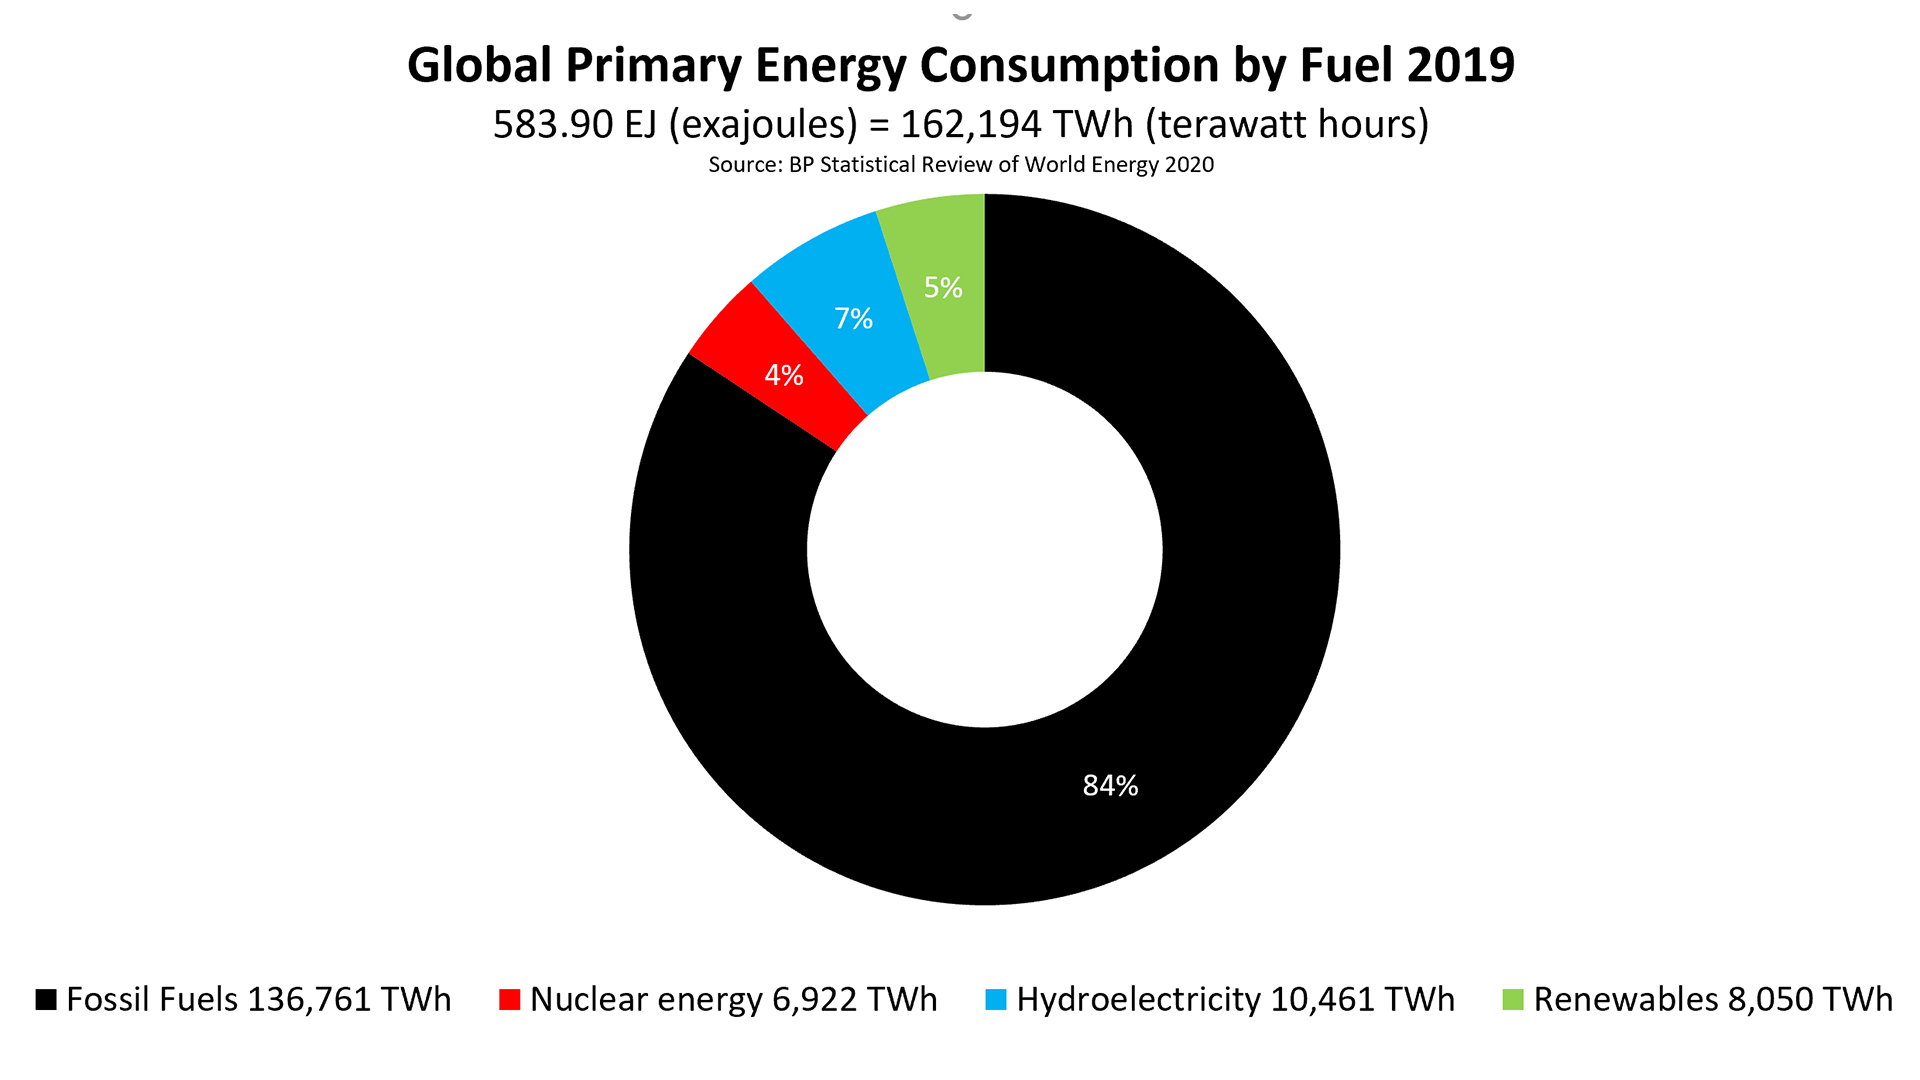 Fig. 2. Global Primary Energy Consumption by Fuel in Terawatts